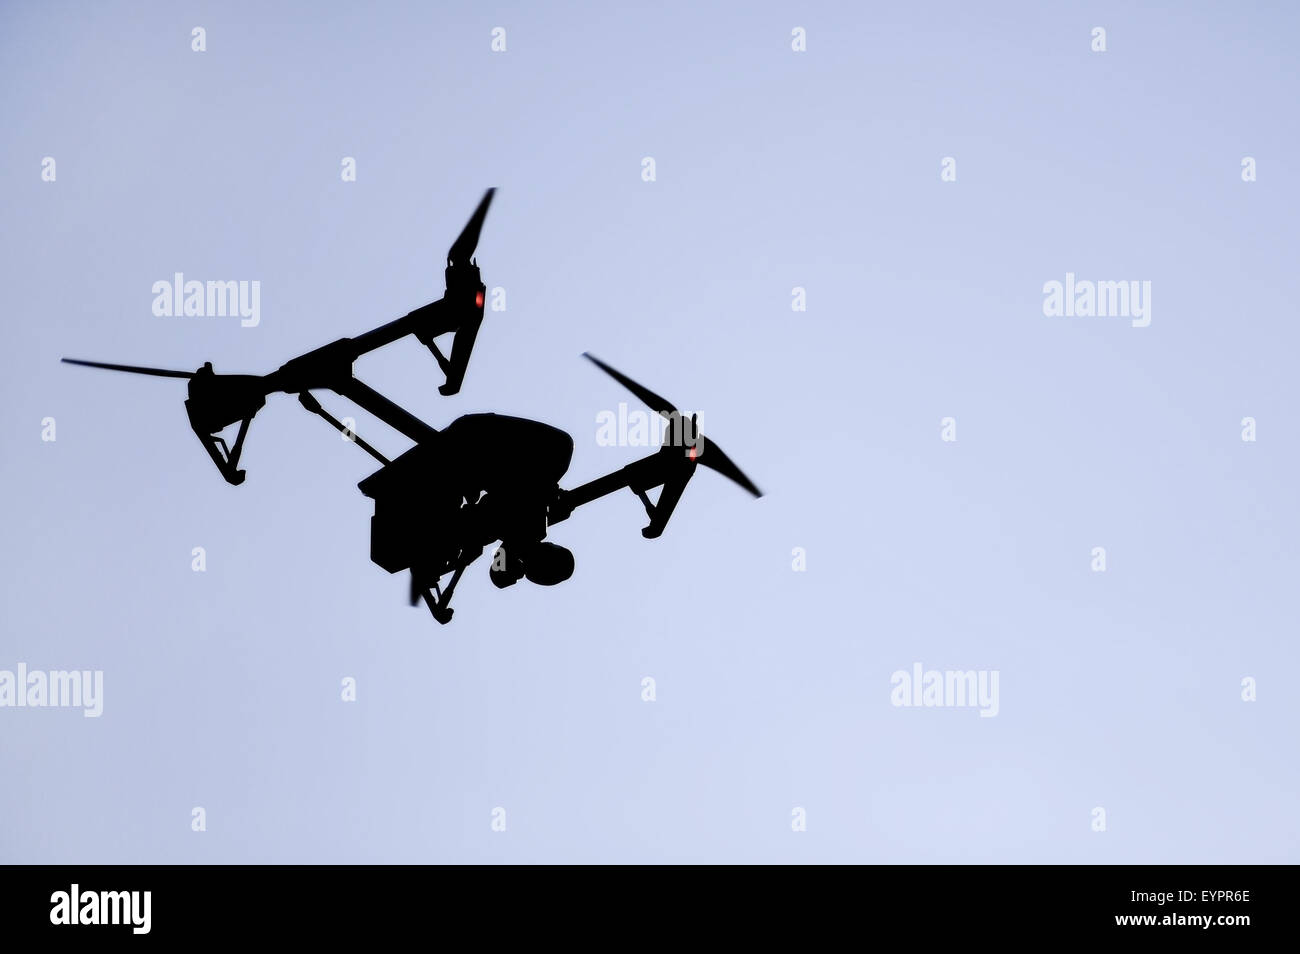 Aerial filming drone silhouetted against blue sky Stock Photo